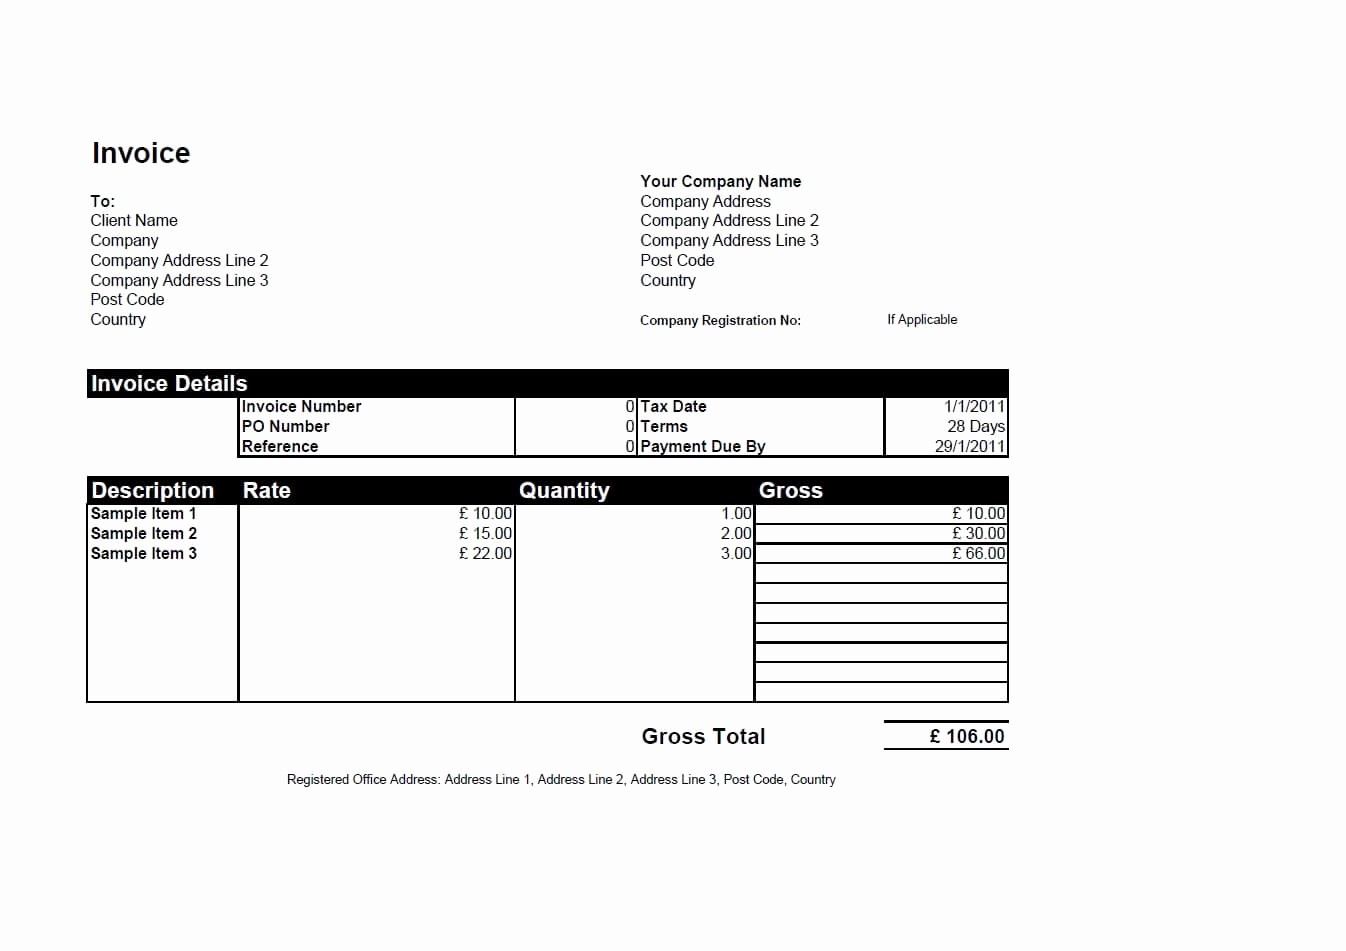 Excel Invoice Template with Logo Luxury Free Invoice Template with Logo Invoice Template Ideas